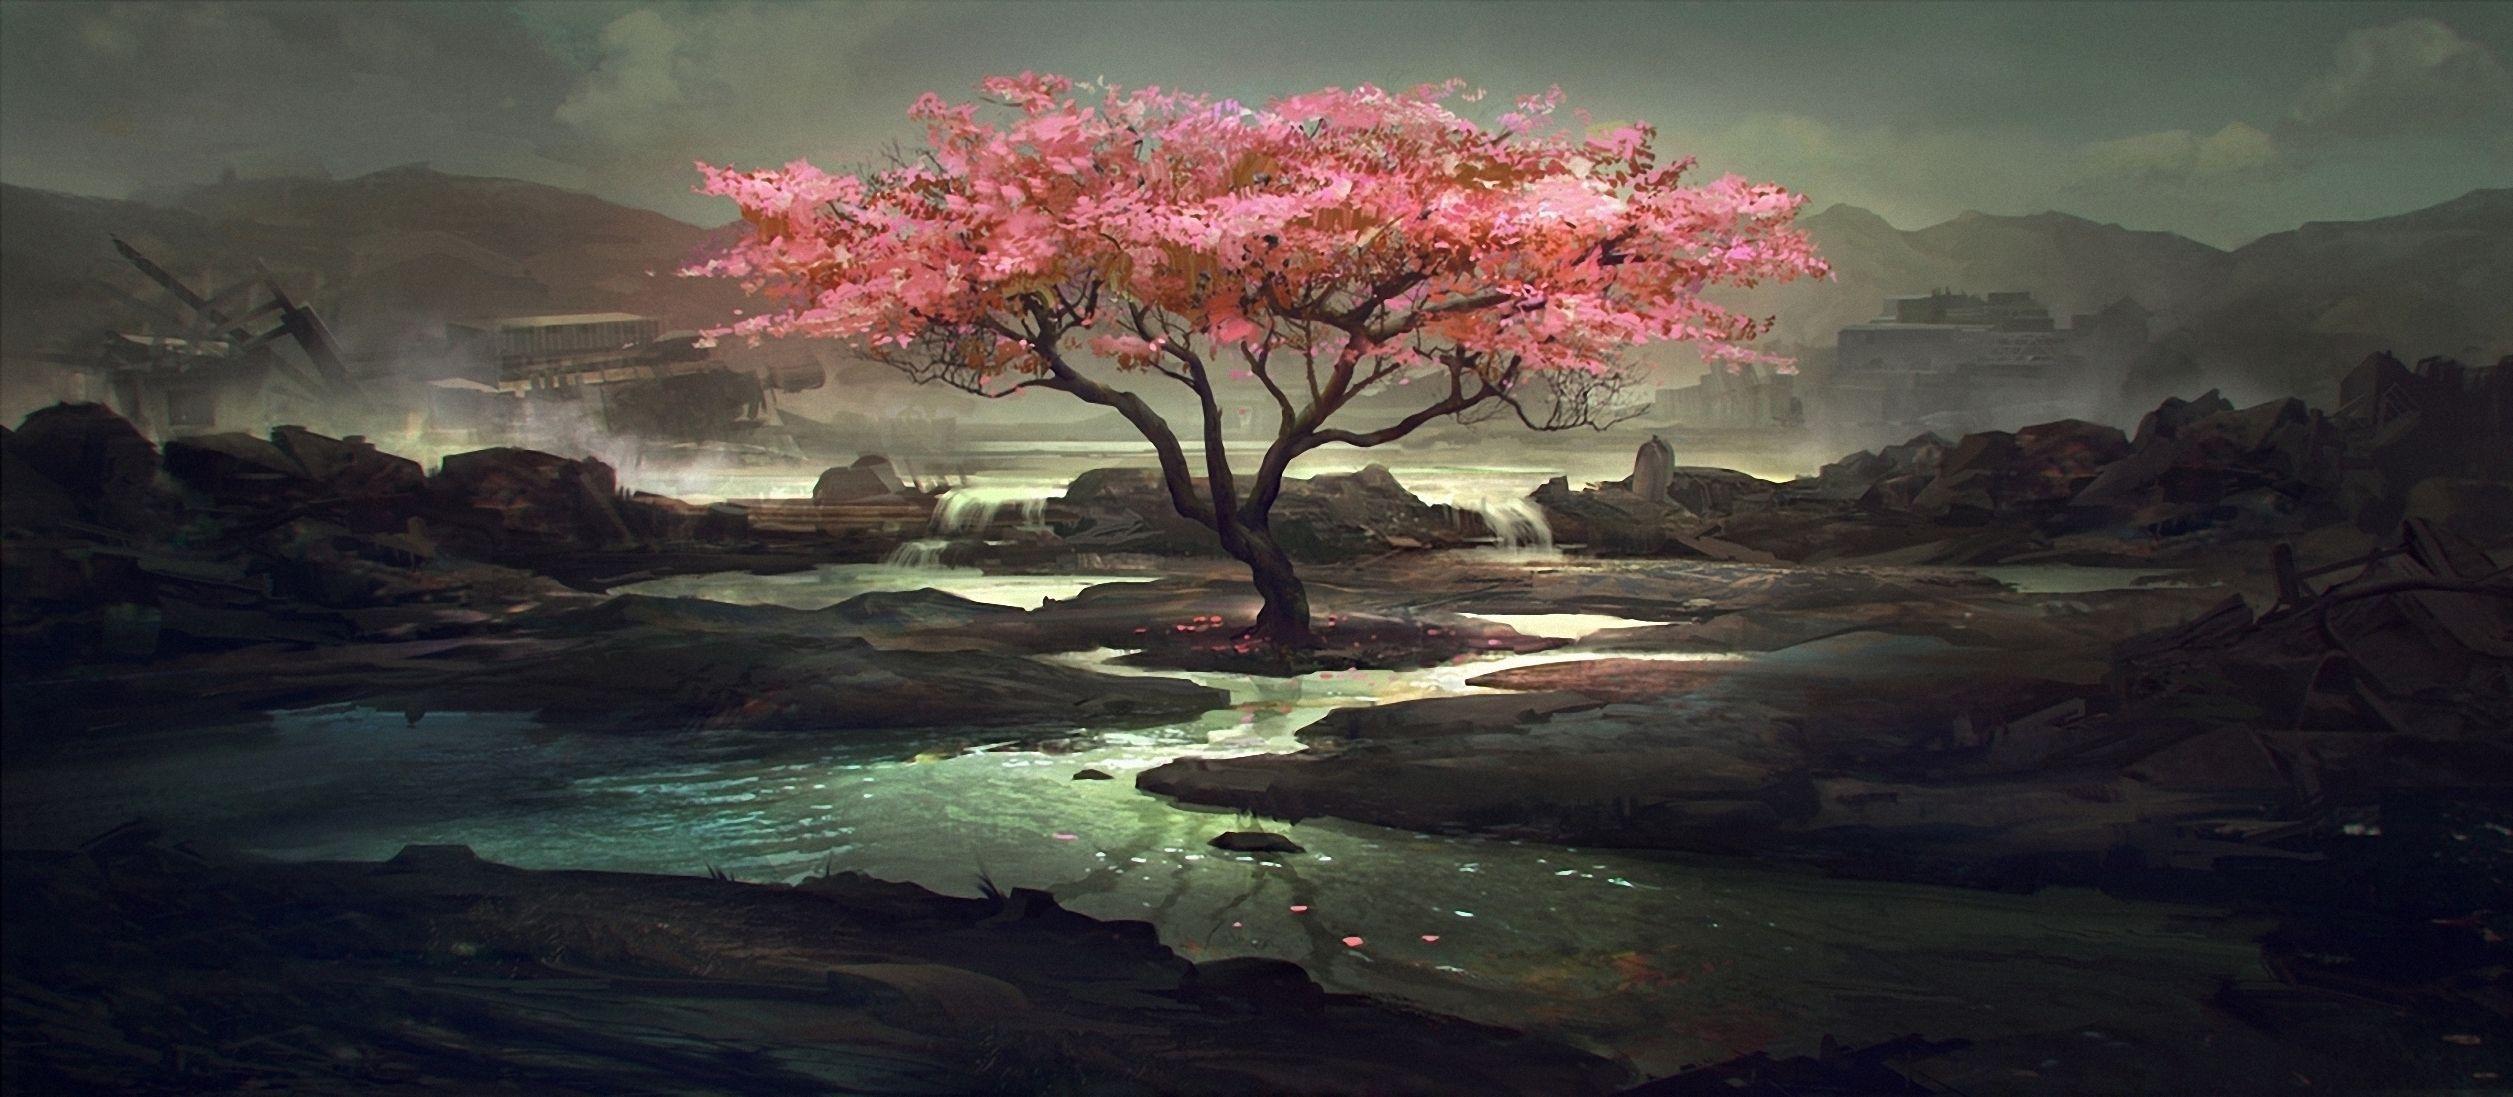 Flowering tree on the dark nature wallpaper and image